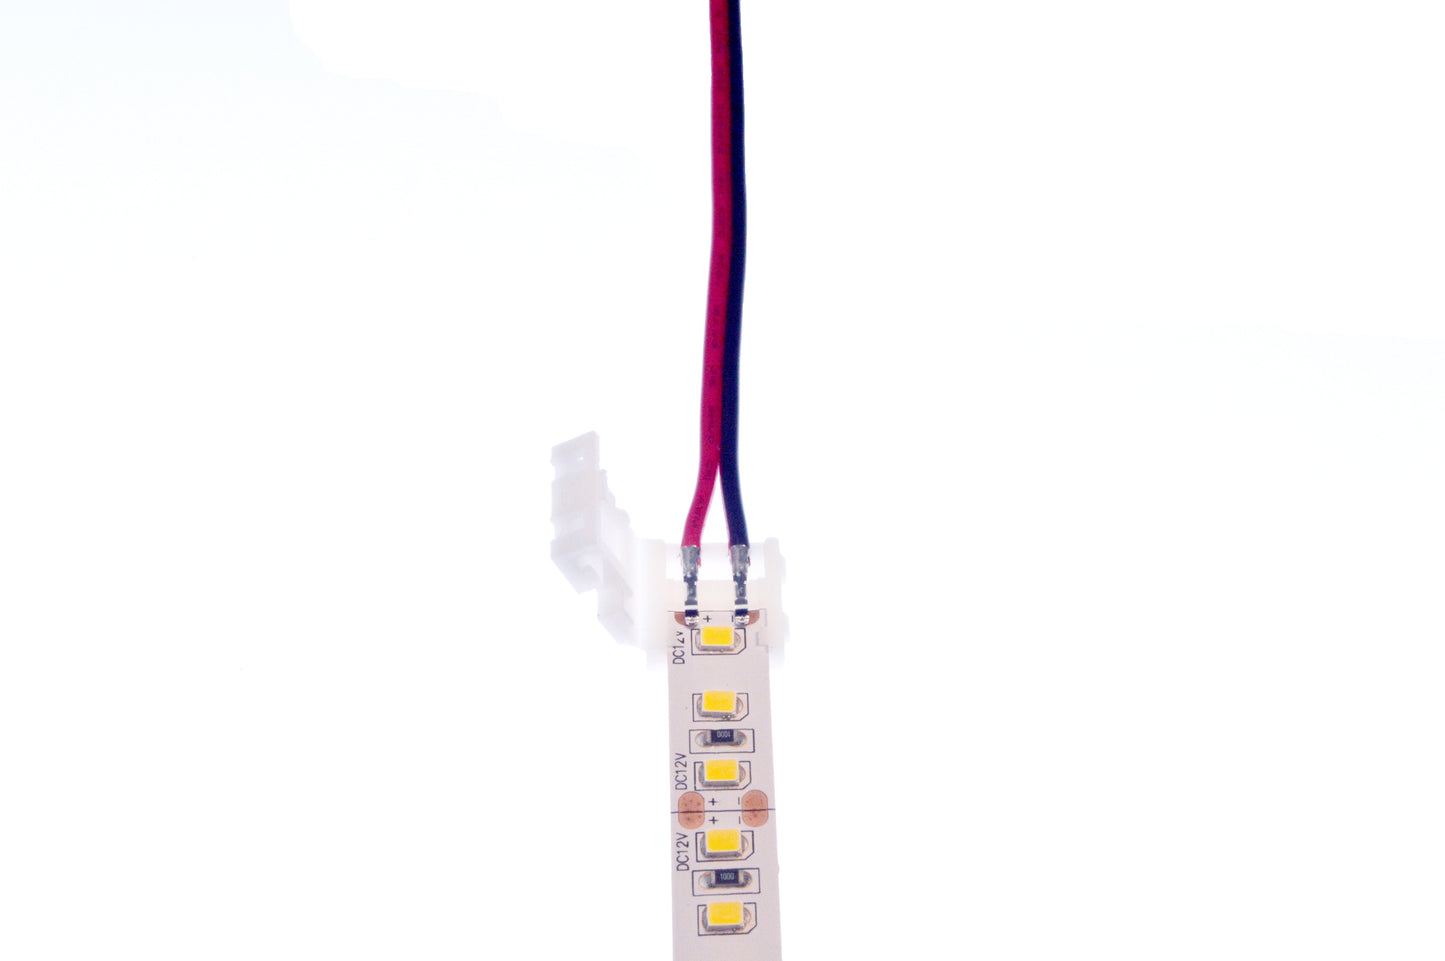 PN 3070 | LED Strip to Wire | Solderless Connector Cable for Single Color LED Strip - 10 PACK